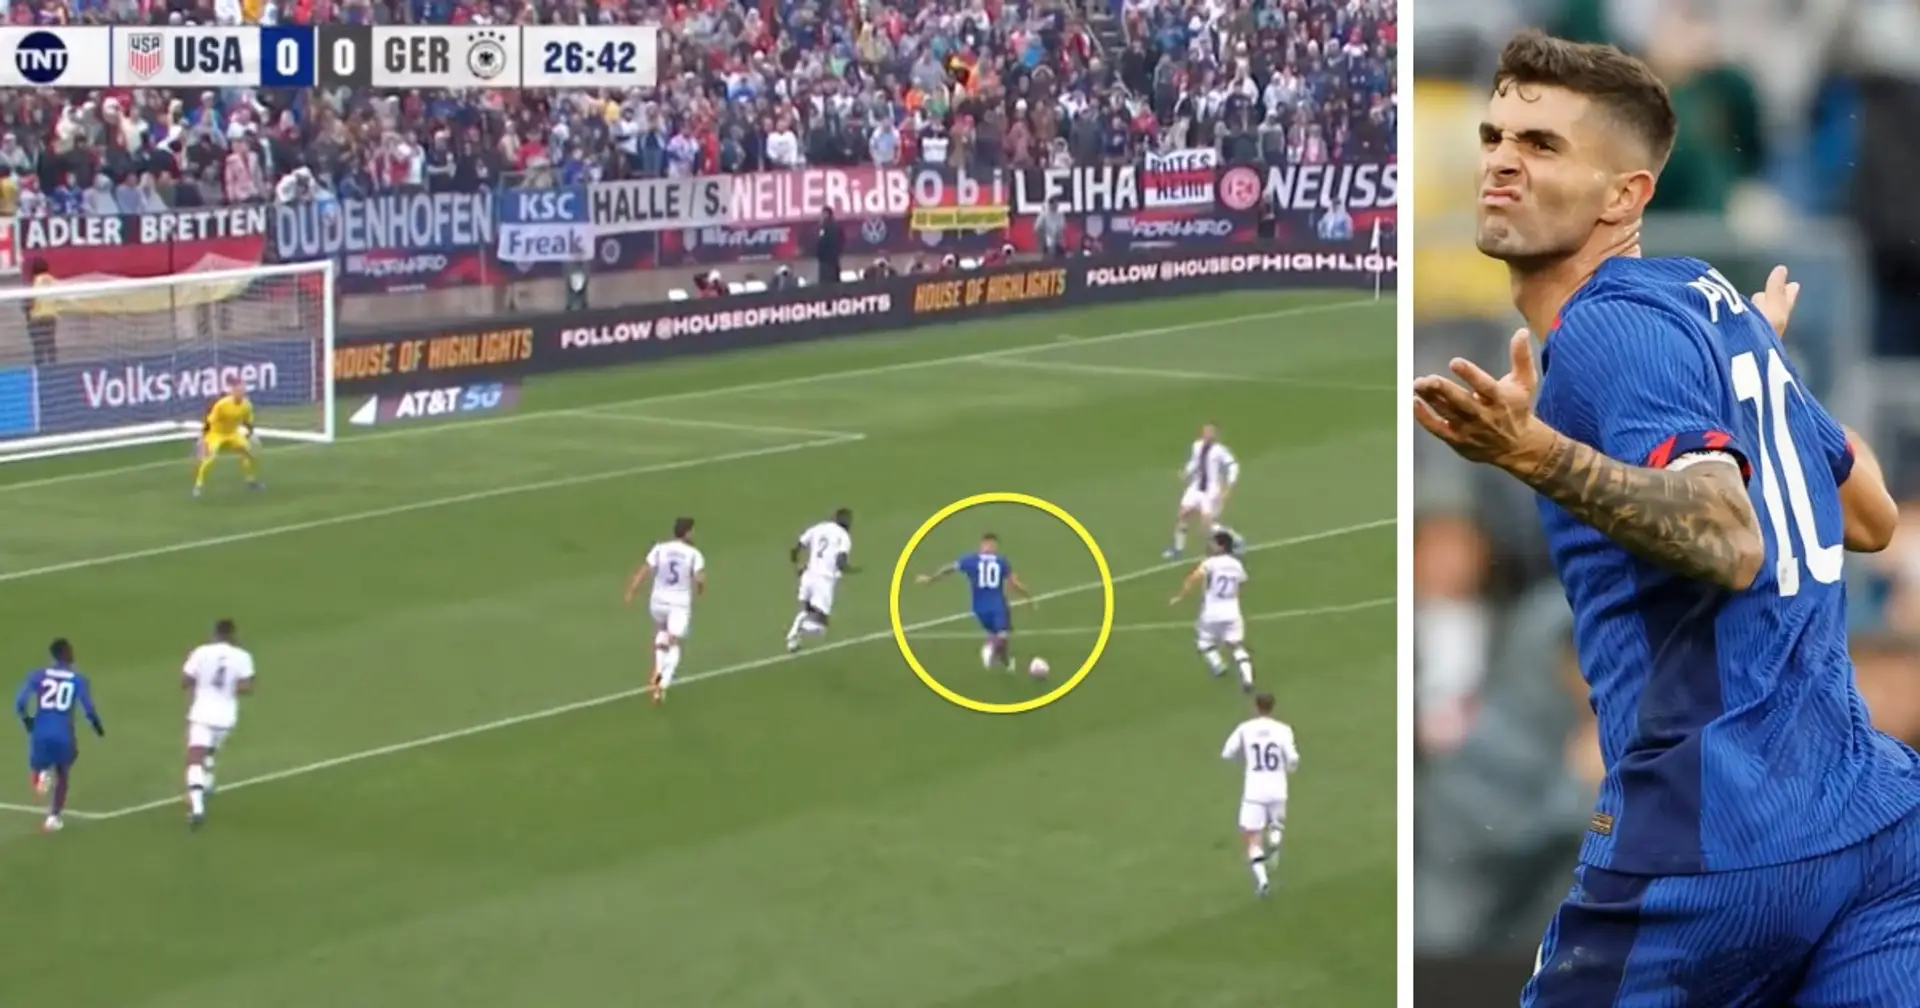 Former Chelsea winger Pulisic scores absolute screamer for USA against Germany (video)